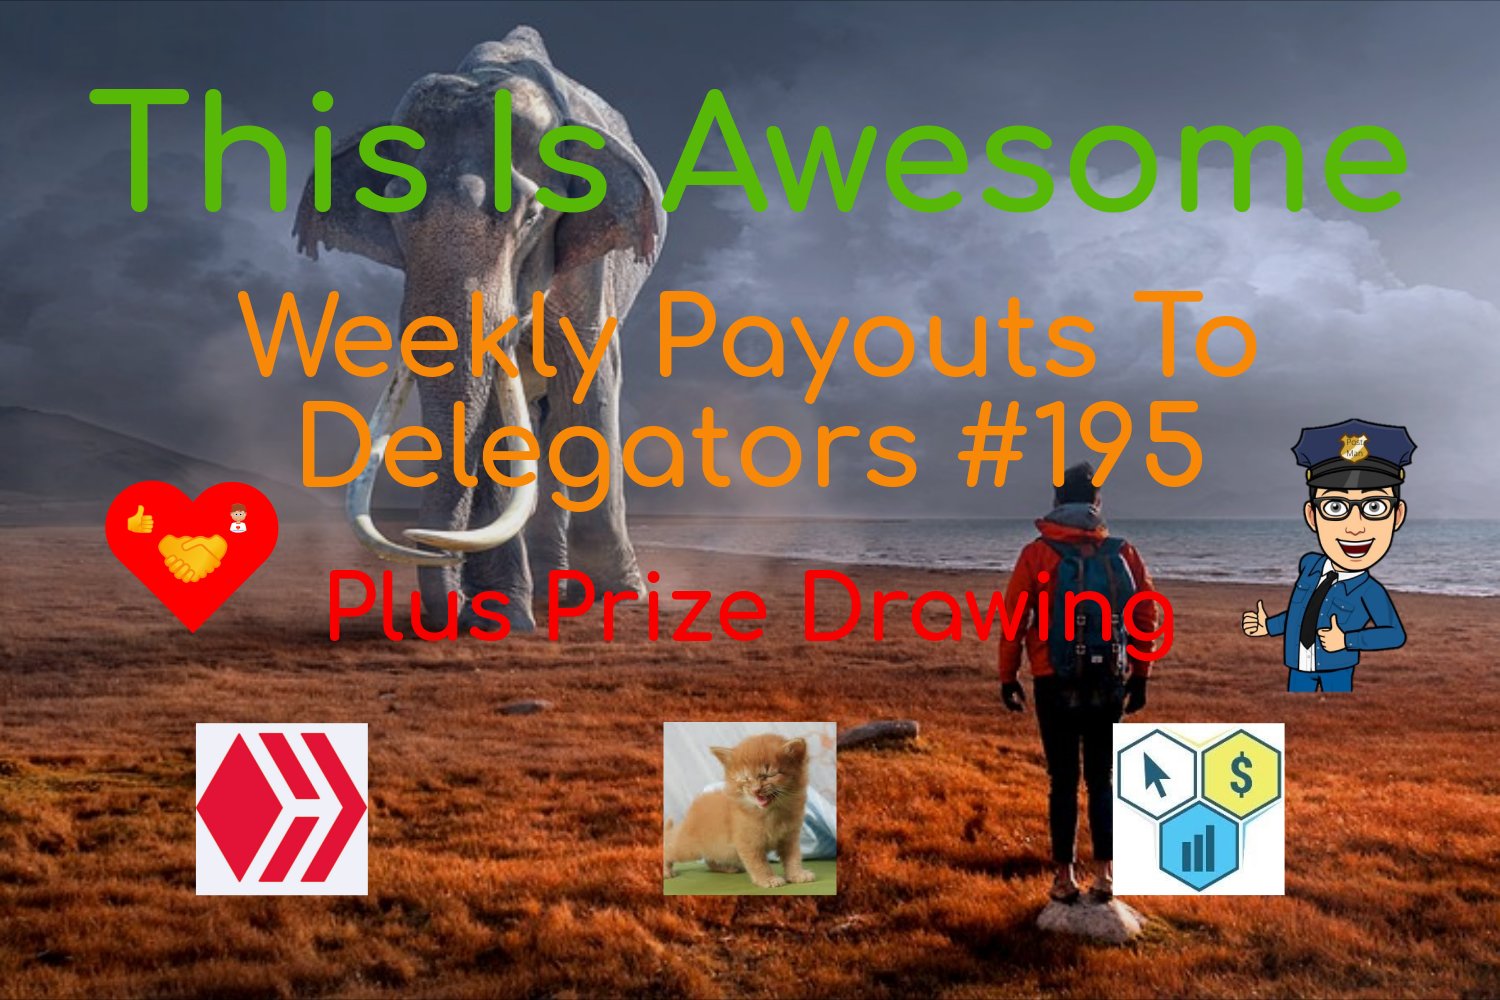 @thisisawesome/this-is-awesome-weekly-payouts-to-delegators-195-plus-prize-drawing